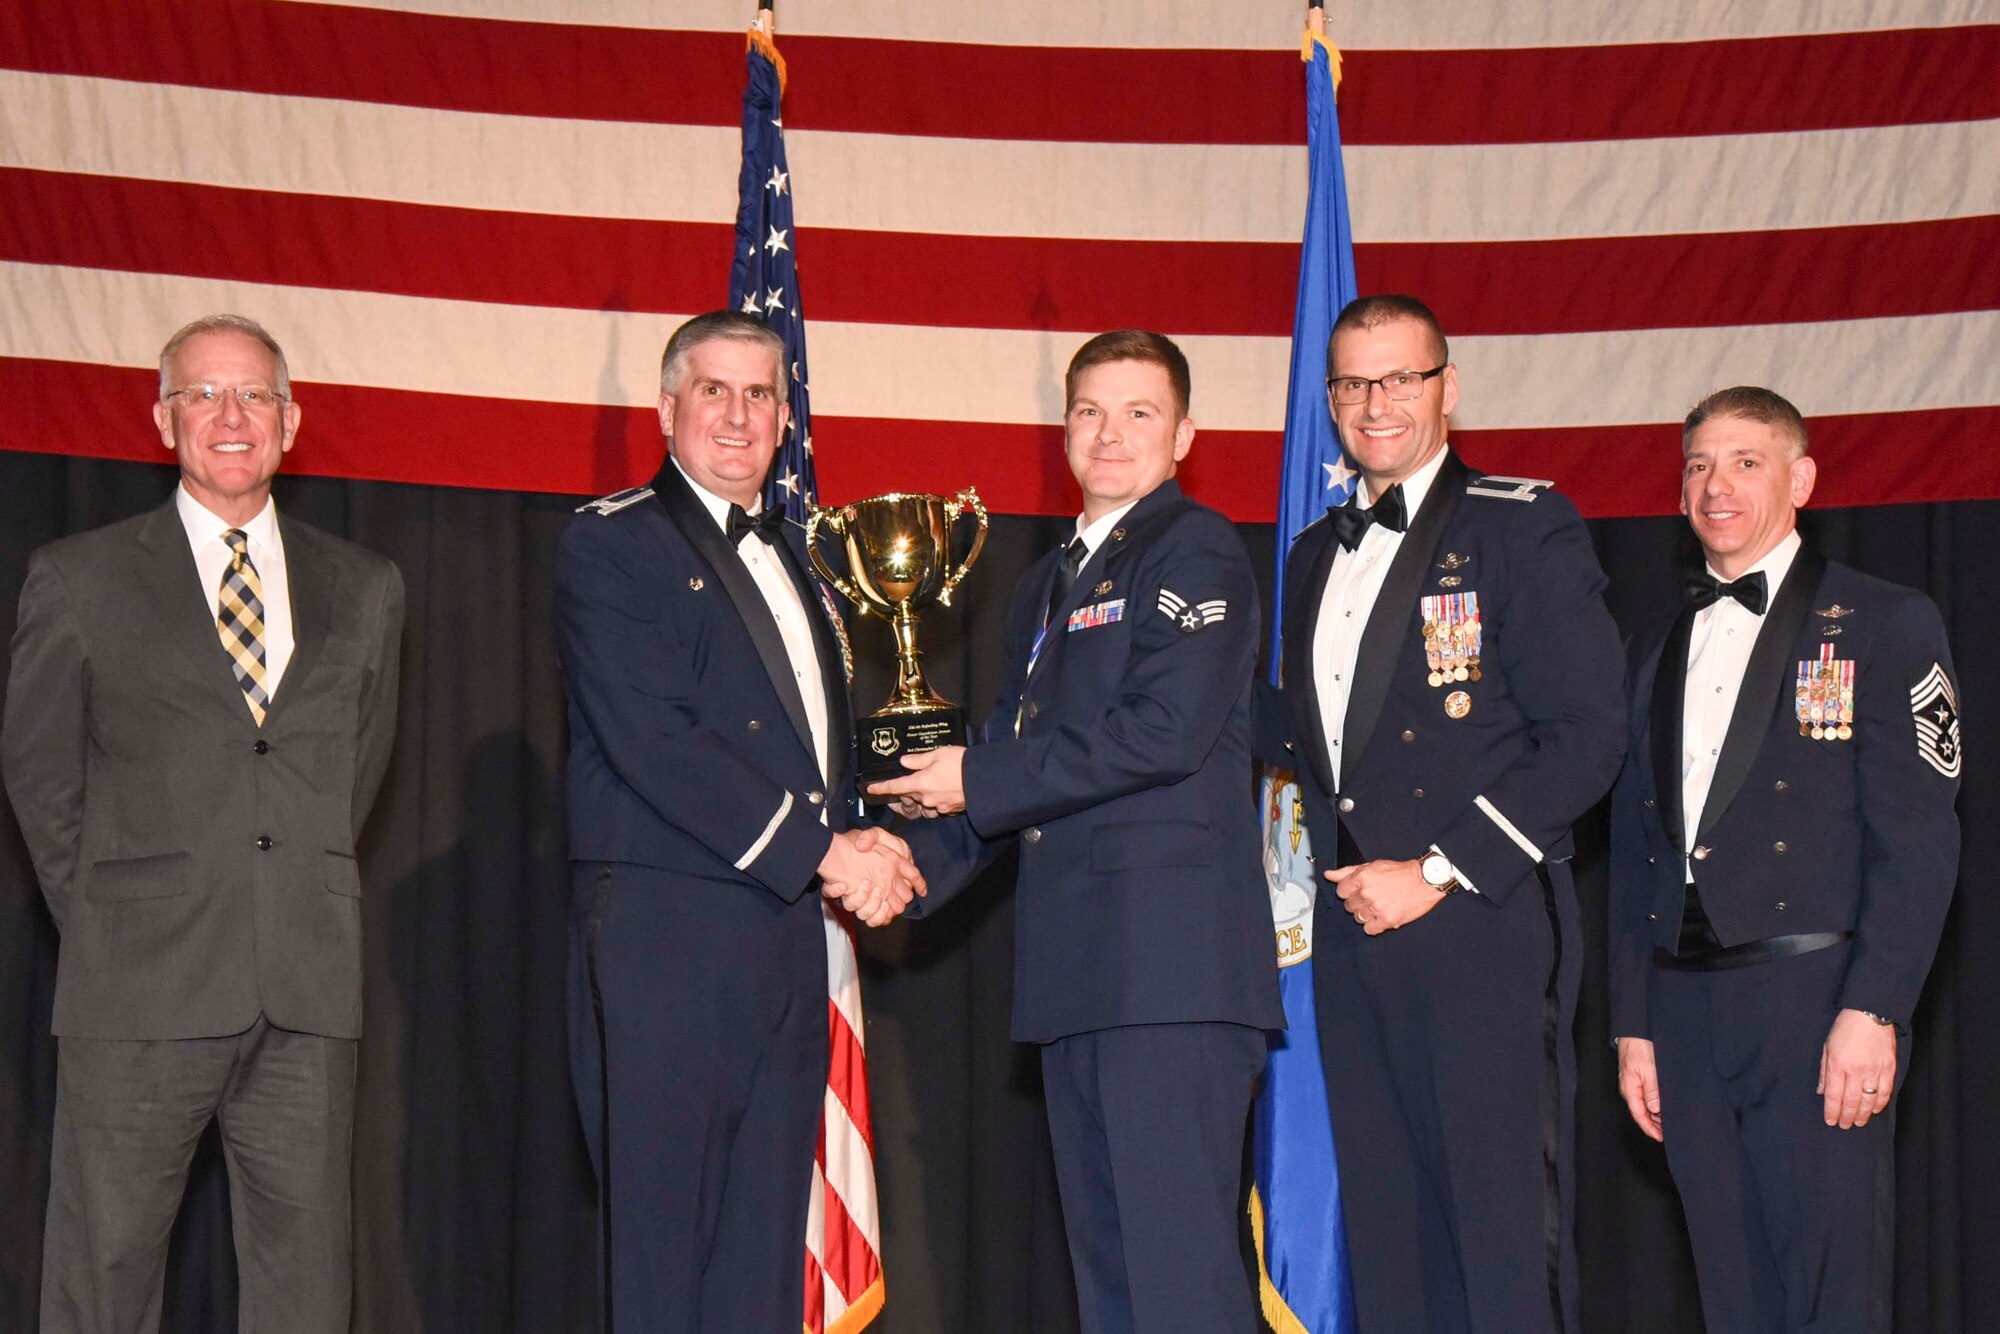 Senior Airman Christopher P. Lippolis, 22nd Operations Support Squadron, center, accepts the 2016 Honor Guardsman of the Year, Airman award, Feb. 3, 2017, at McConnell Air Force Base, Kan. The annual awards ceremony recognized military and civilian members who excel in their areas of responsibilities, leadership qualities, community involvement, self-improvement and innovation during the period of January to December 2016. (U.S. Air Force photo/Senior Airman Christopher Thornbury)